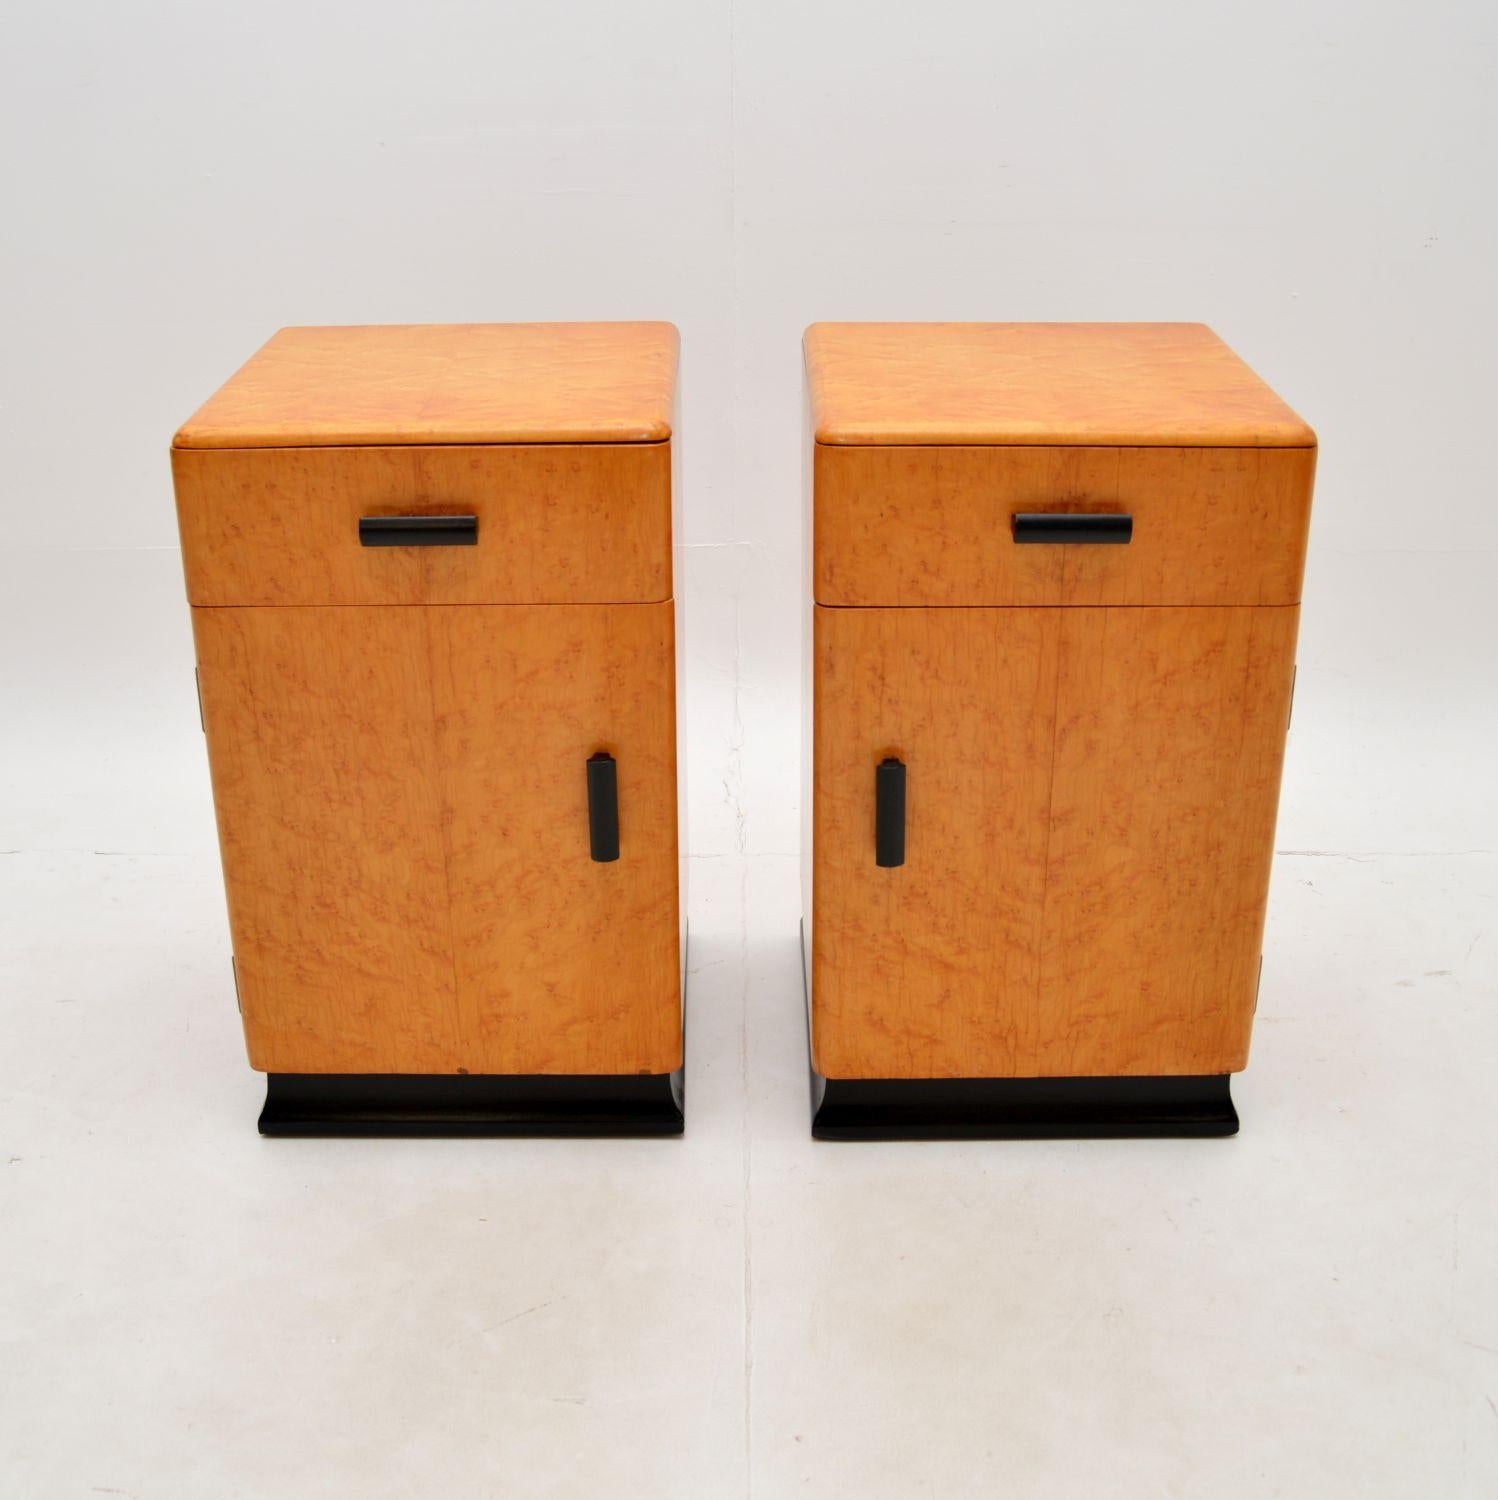 A beautiful pair of Art Deco birds eye maple bedside cabinets. They were made in England, they date from around the 1930’s.

These are very well made and are a useful size, offering lots of storage space in the cabinet and drawers. They sit on